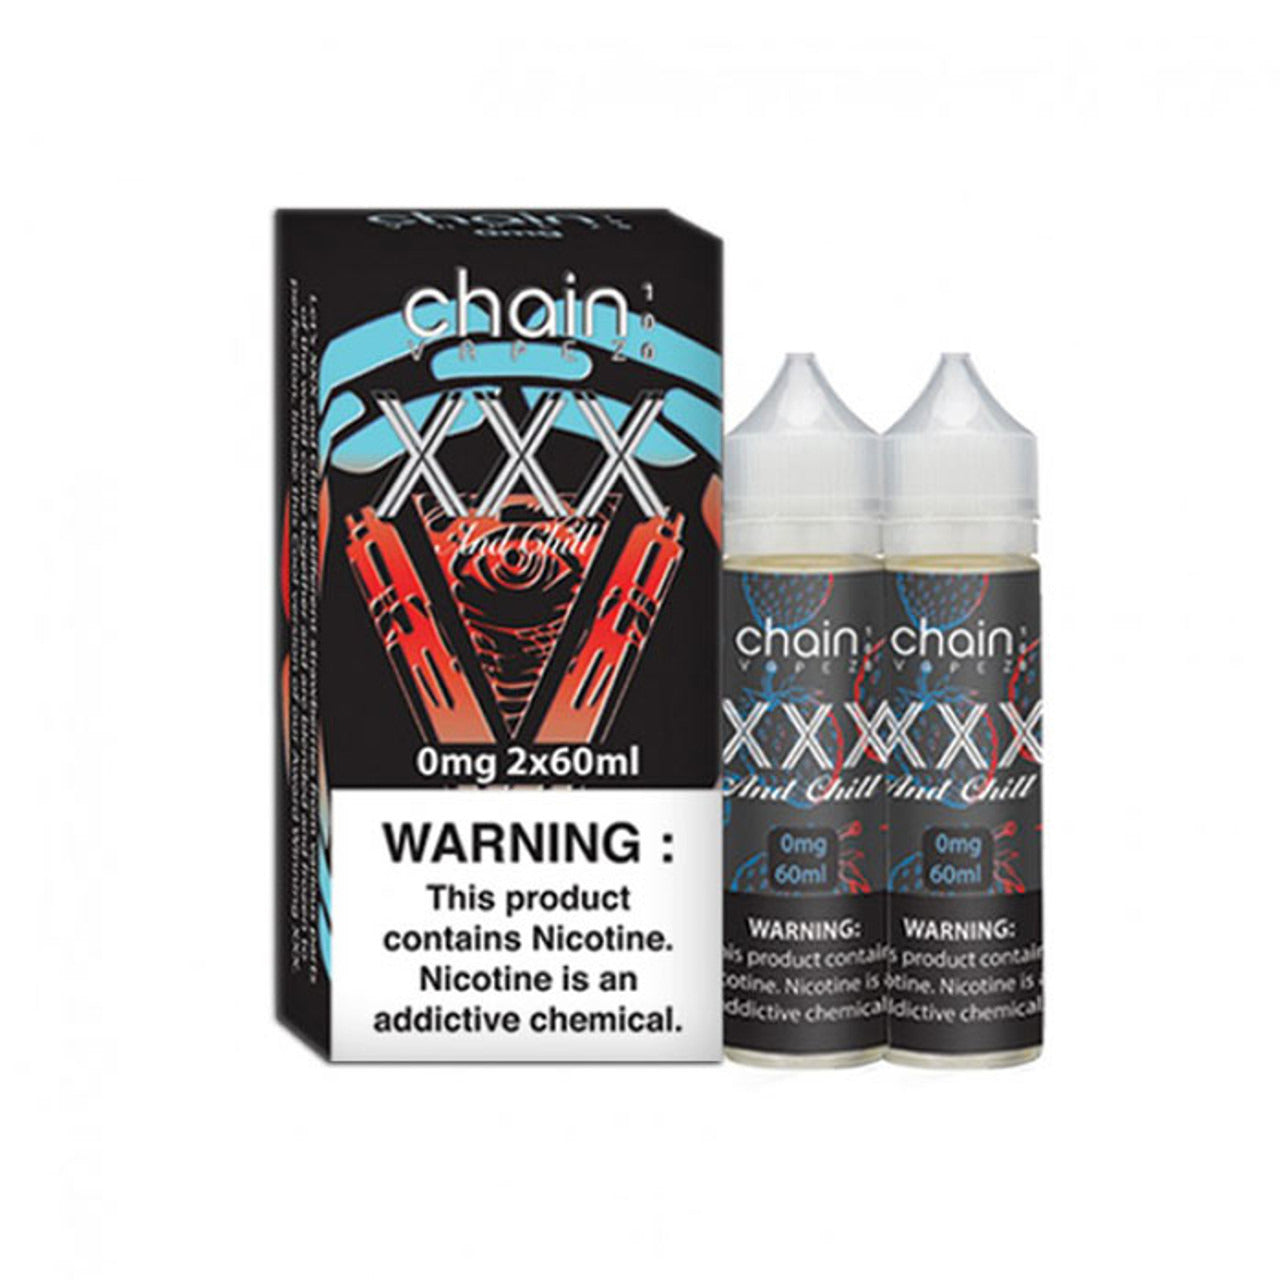 XXX and Chill by Chain Vapez 120mL (2x60mL) with Packaging